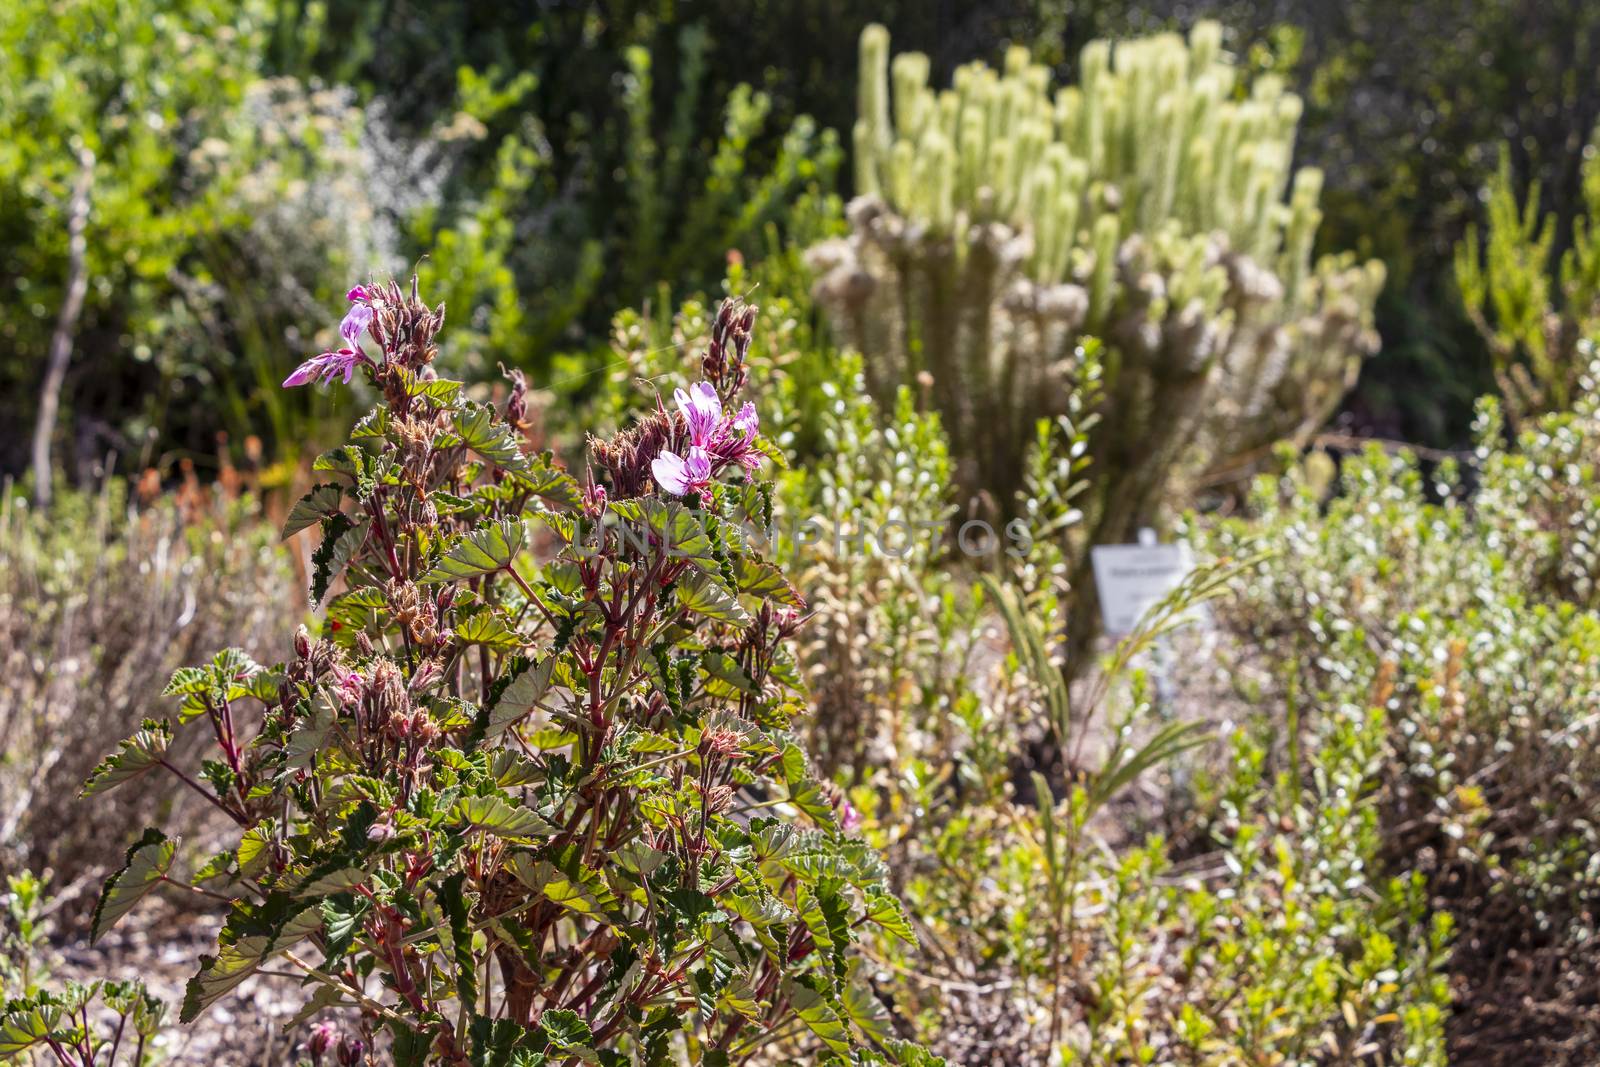 Purple pink flowers plants in the Kirstenbosch National Botanical Garden, Cape Town, South Africa.